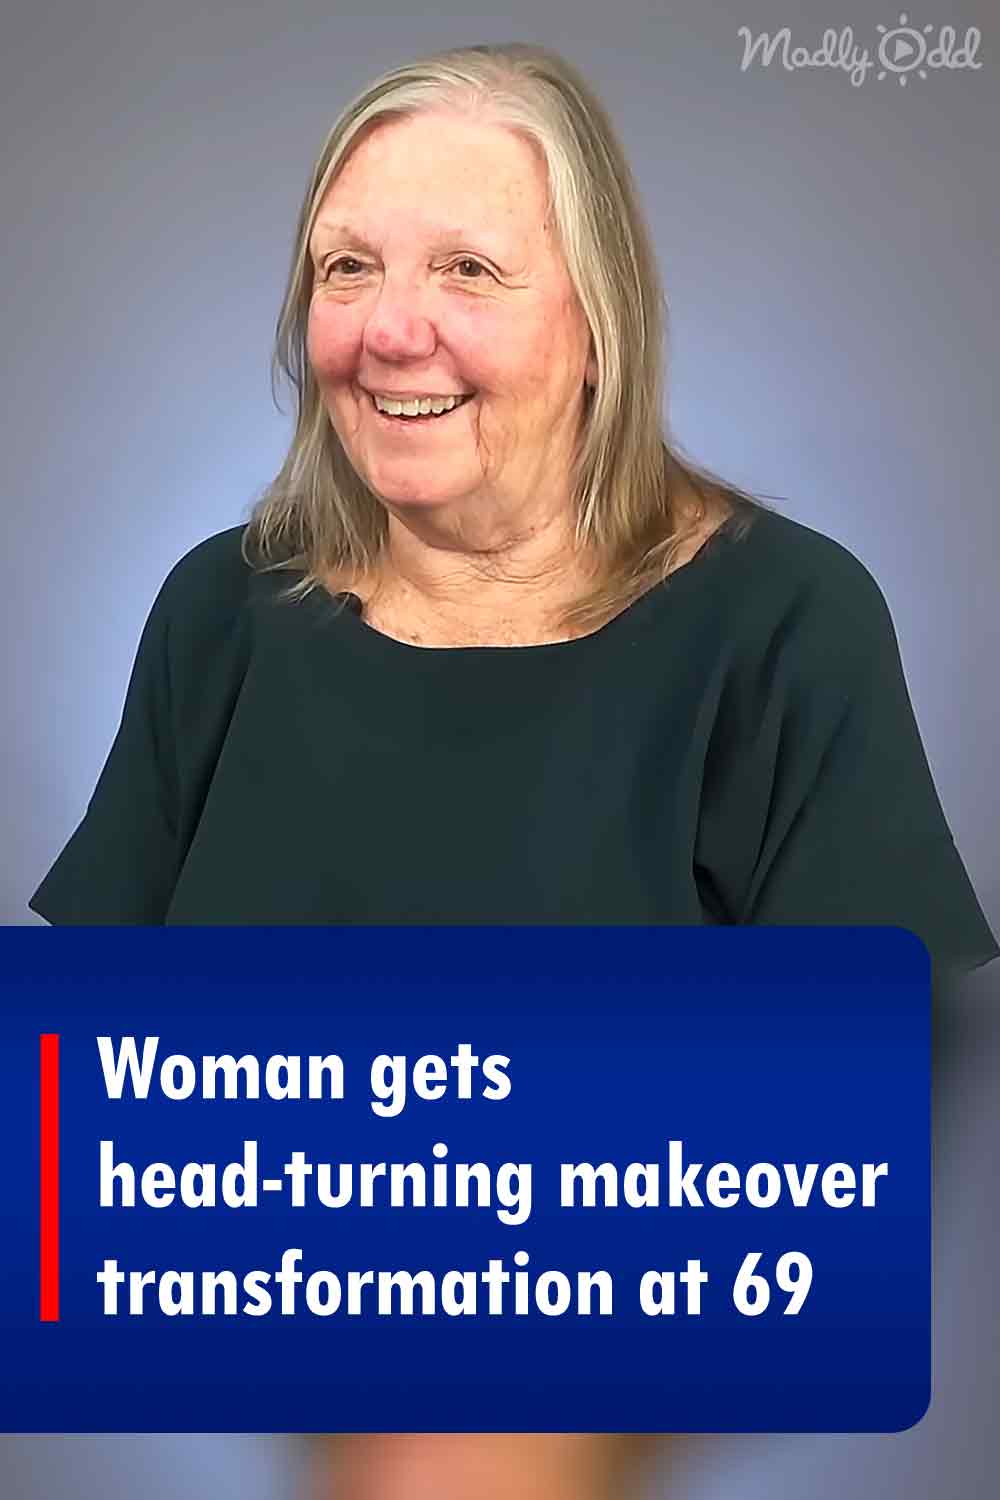 Woman gets head-turning makeover transformation at 69